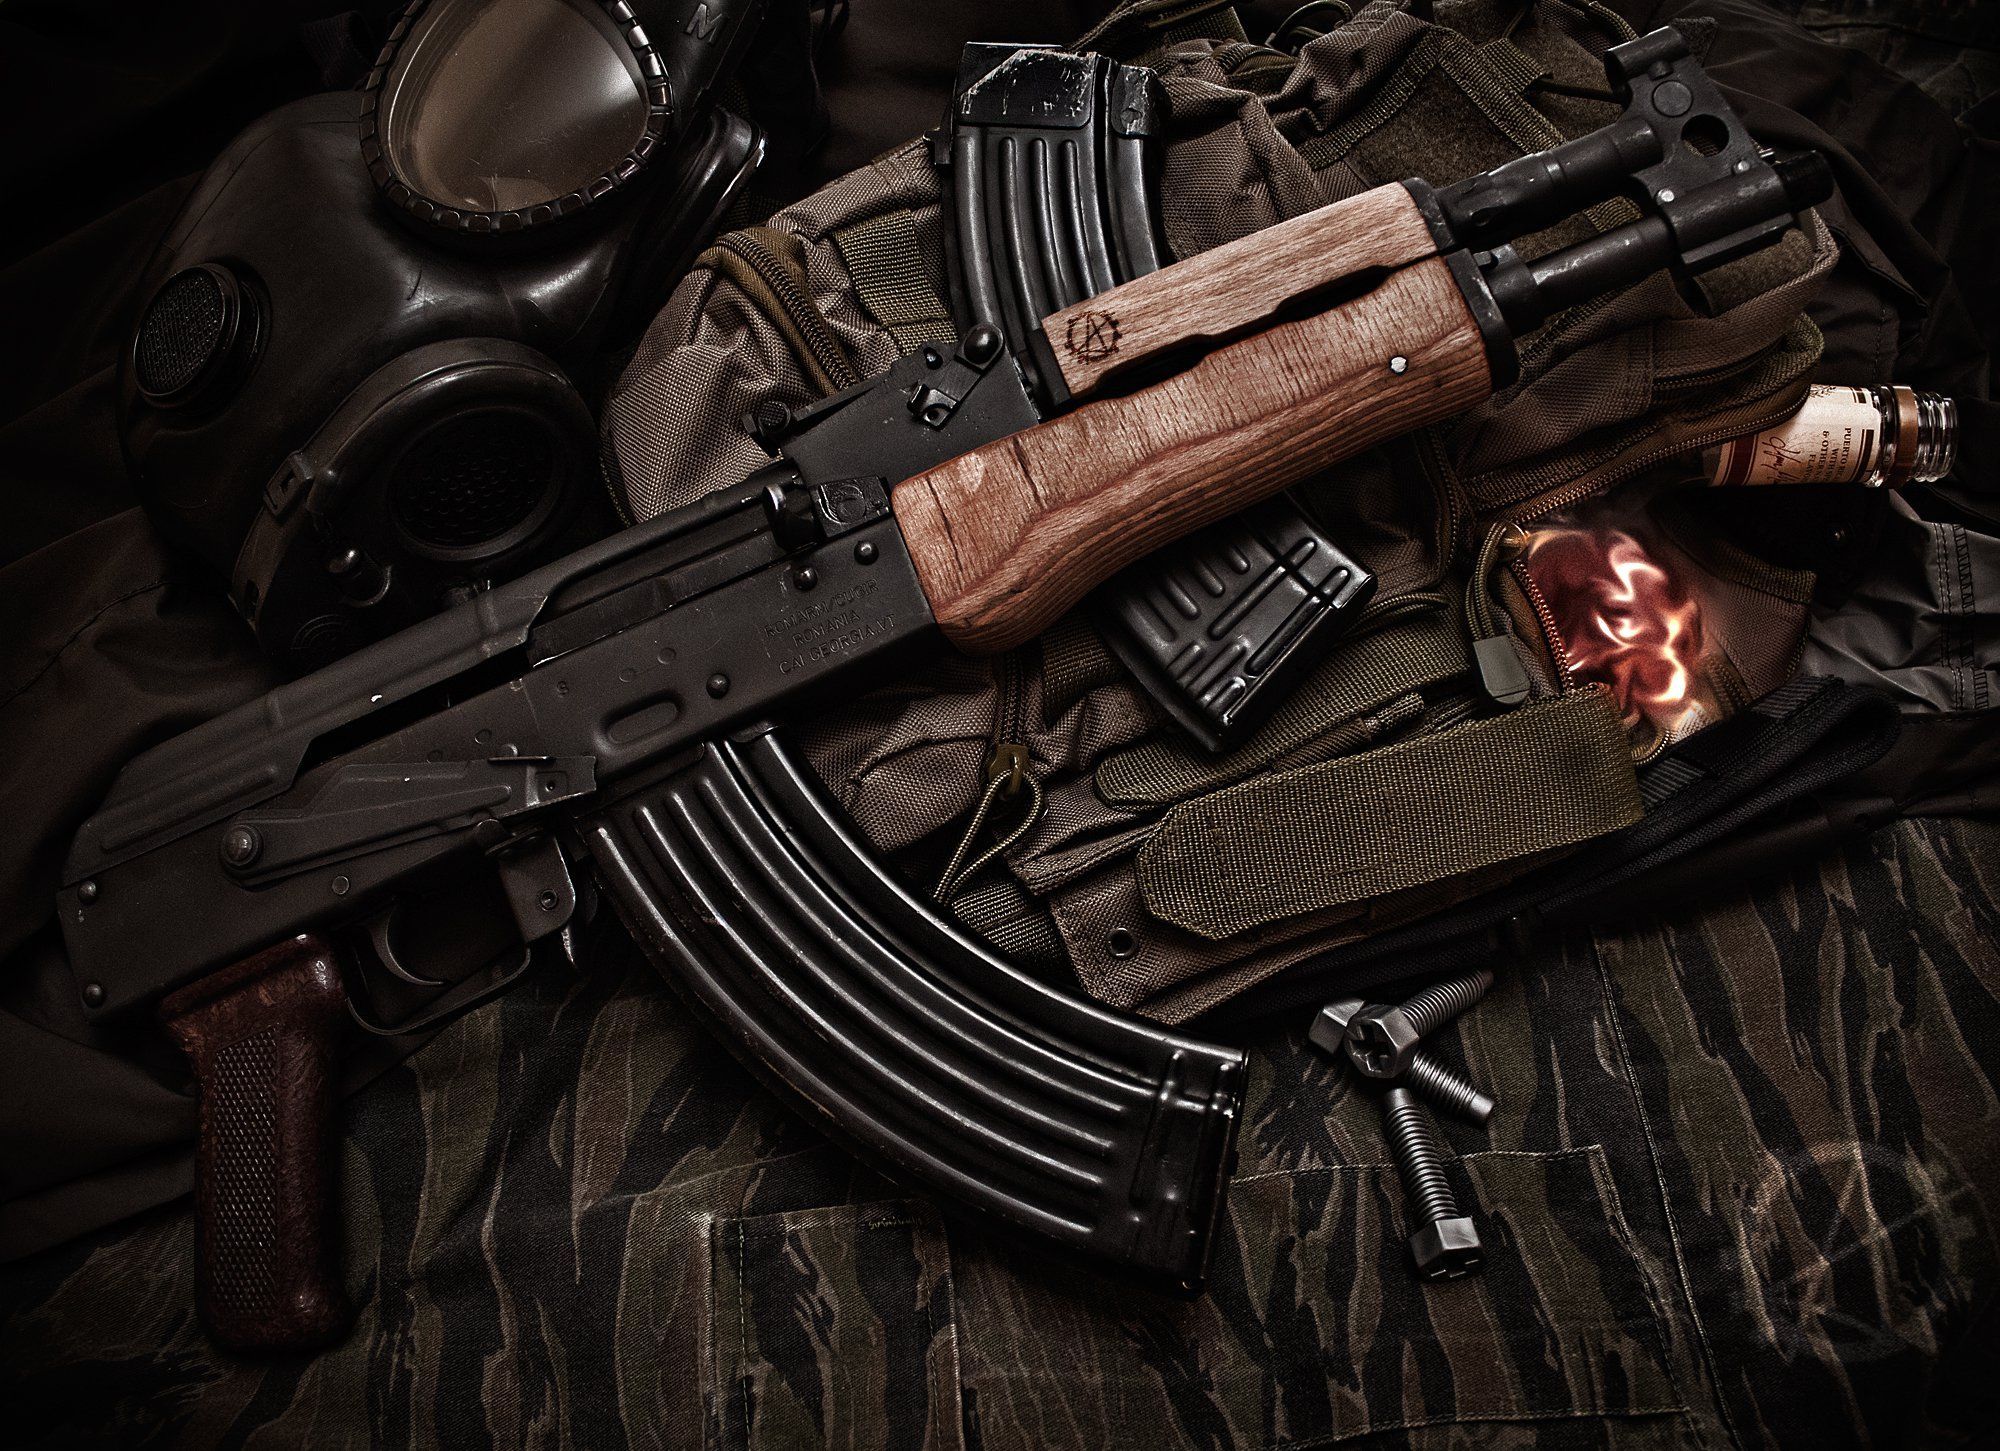 Century Arms Draco A Popular AK Pistol Made Stateside  An Official  Journal Of The NRA